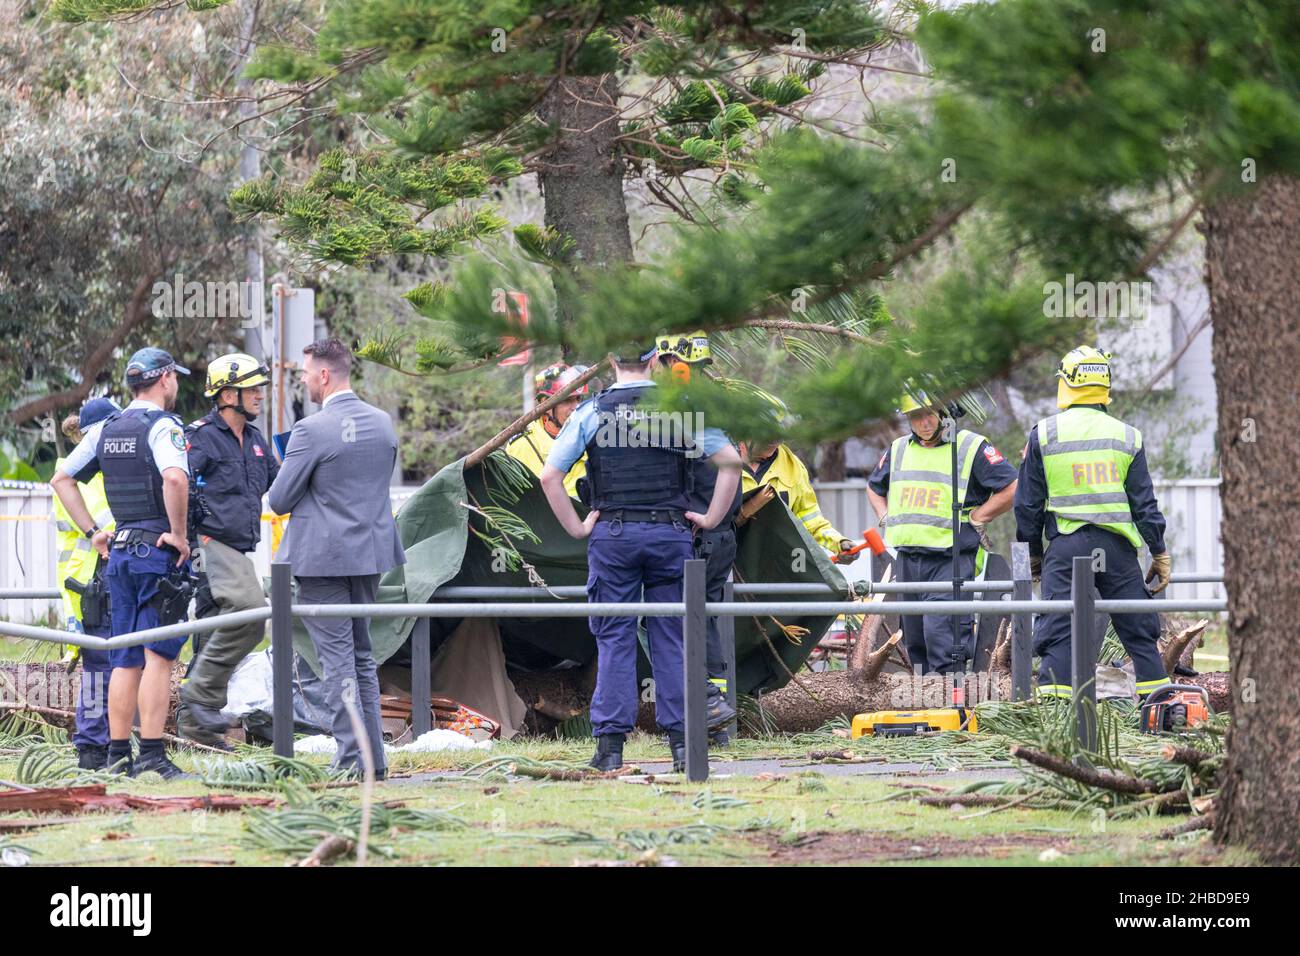 Narrabeen, Sydney, Australia. 19th Dec, 2021. Narrabeen, Sydney, Australia. 19th Dec 2021. Freak storm brought down trees and power lines on Sydney's northern beaches, one lady has died and others are critical, emergency services attended and plain clothes personnel at the scene of the fallen tree that killed a lady near Narrabeen Surf Club. Credit: martin berry/Alamy Live News Stock Photo